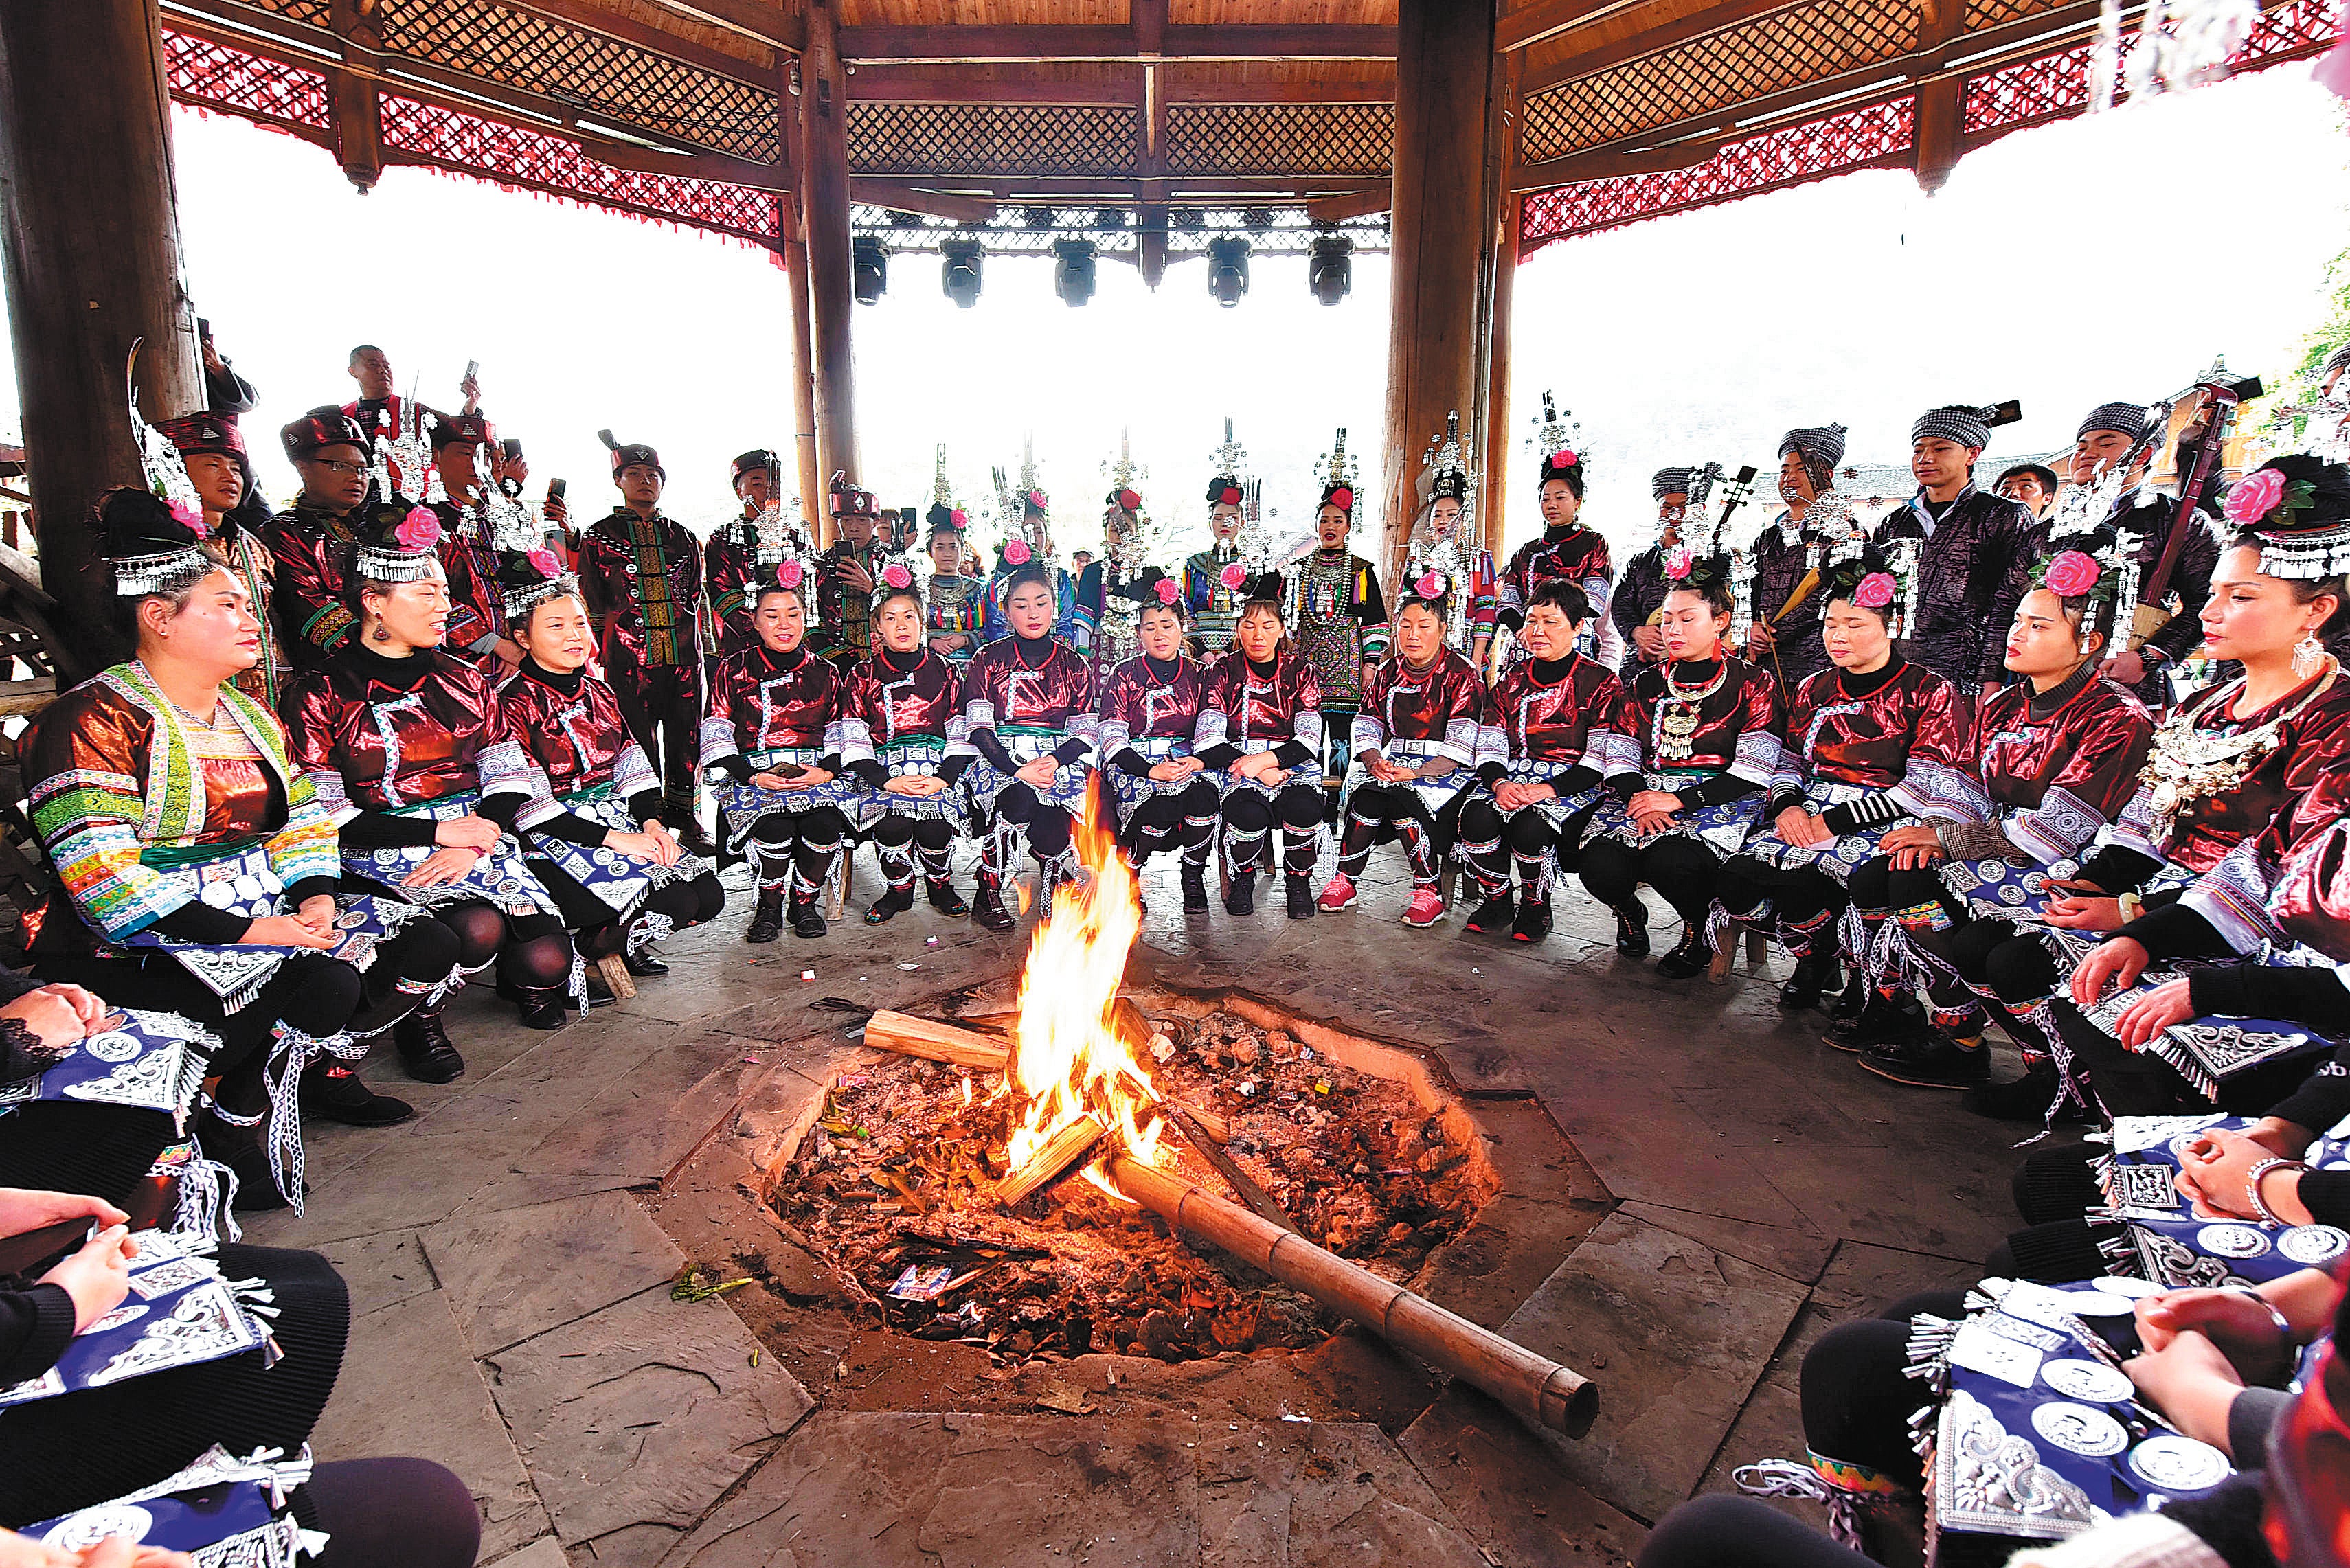 Members of the Dong ethnic group take part in a Grand Song of Dong chorus performance in Jiangkou county, Guizhou province